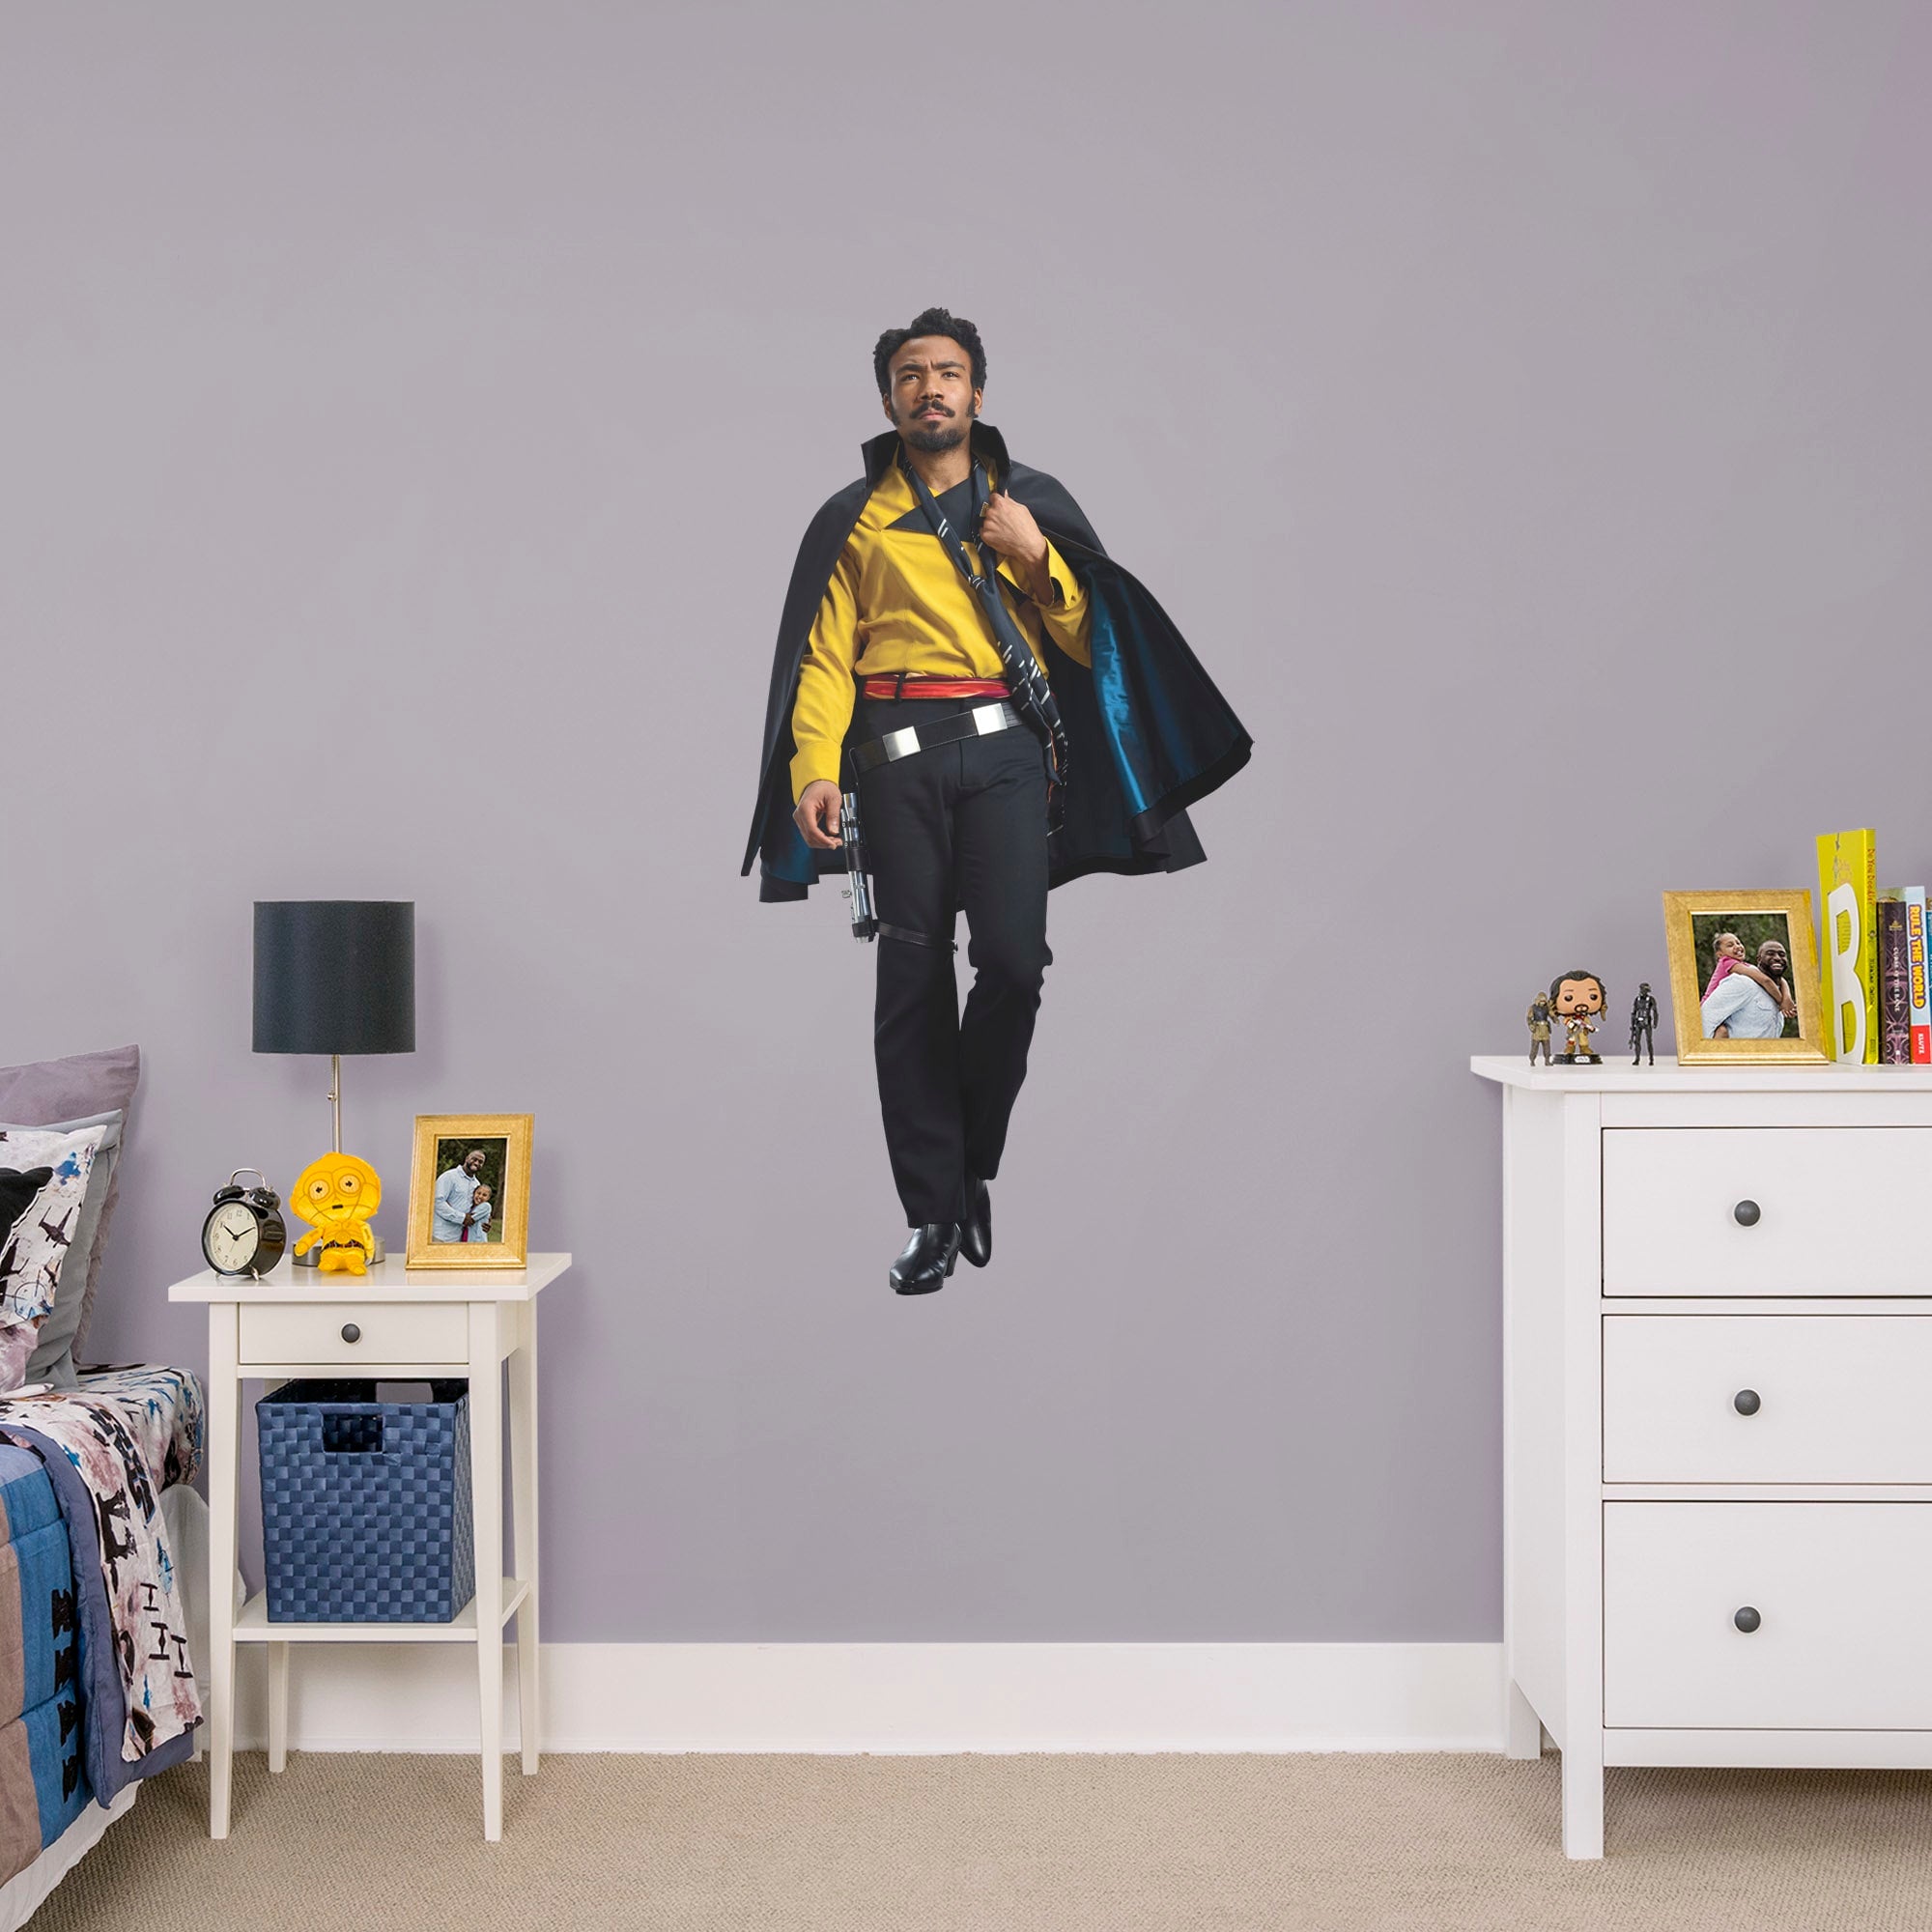 Lando Calrissian - Solo: A Star Wars Story - Officially Licensed Removable Wall Decal Giant Character + 2 Decals (26"W x 51"H) b